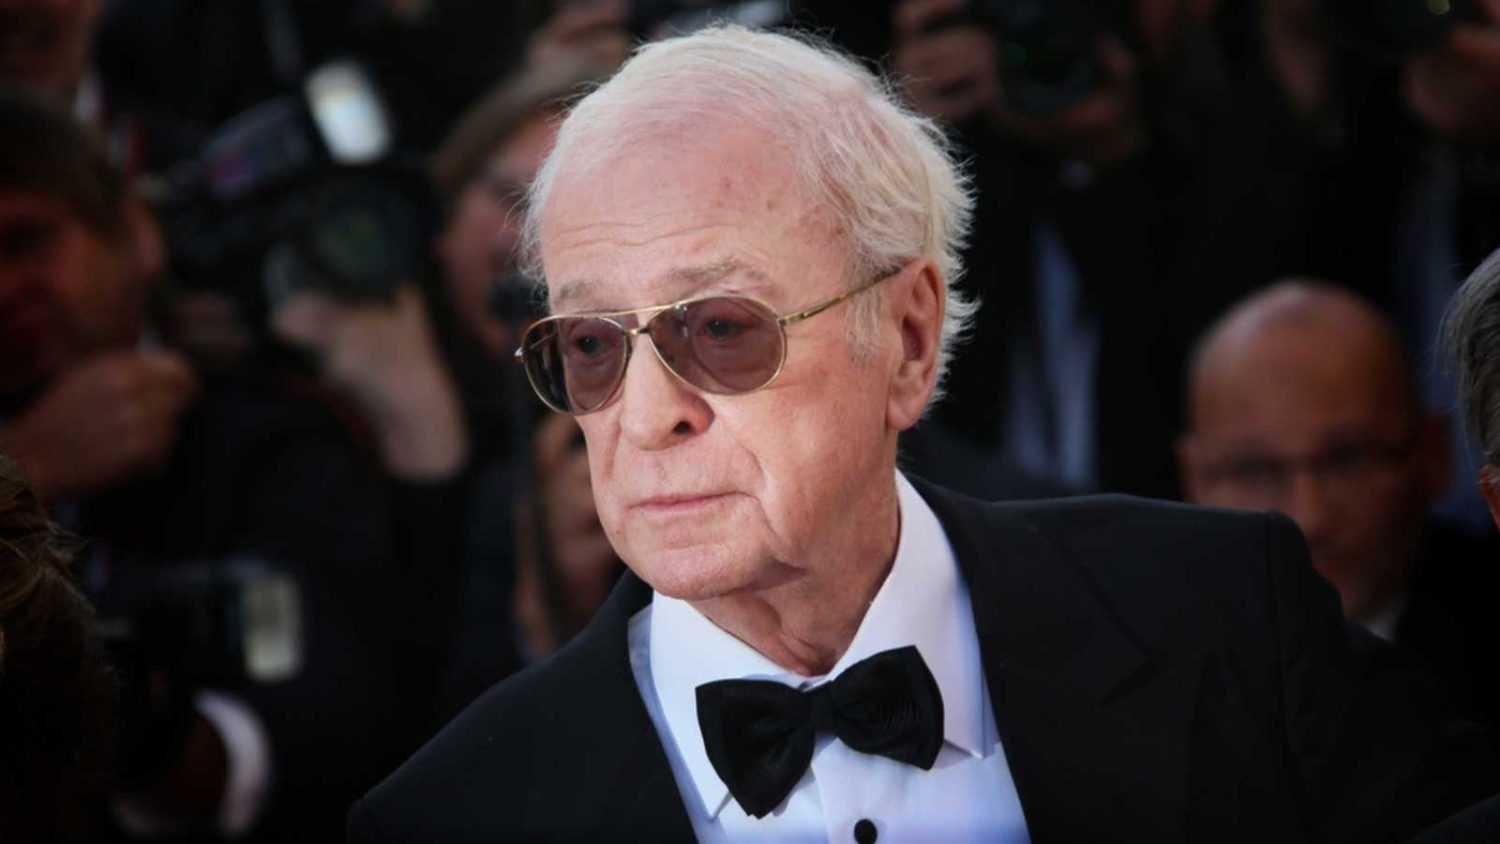 CANNES, FRANCE - MAY 20, 2015: Sir Michael Caine attends the 'Youth' Premiere during the 68th annual Cannes Film Festival on May 20, 2015 in Cannes, France.